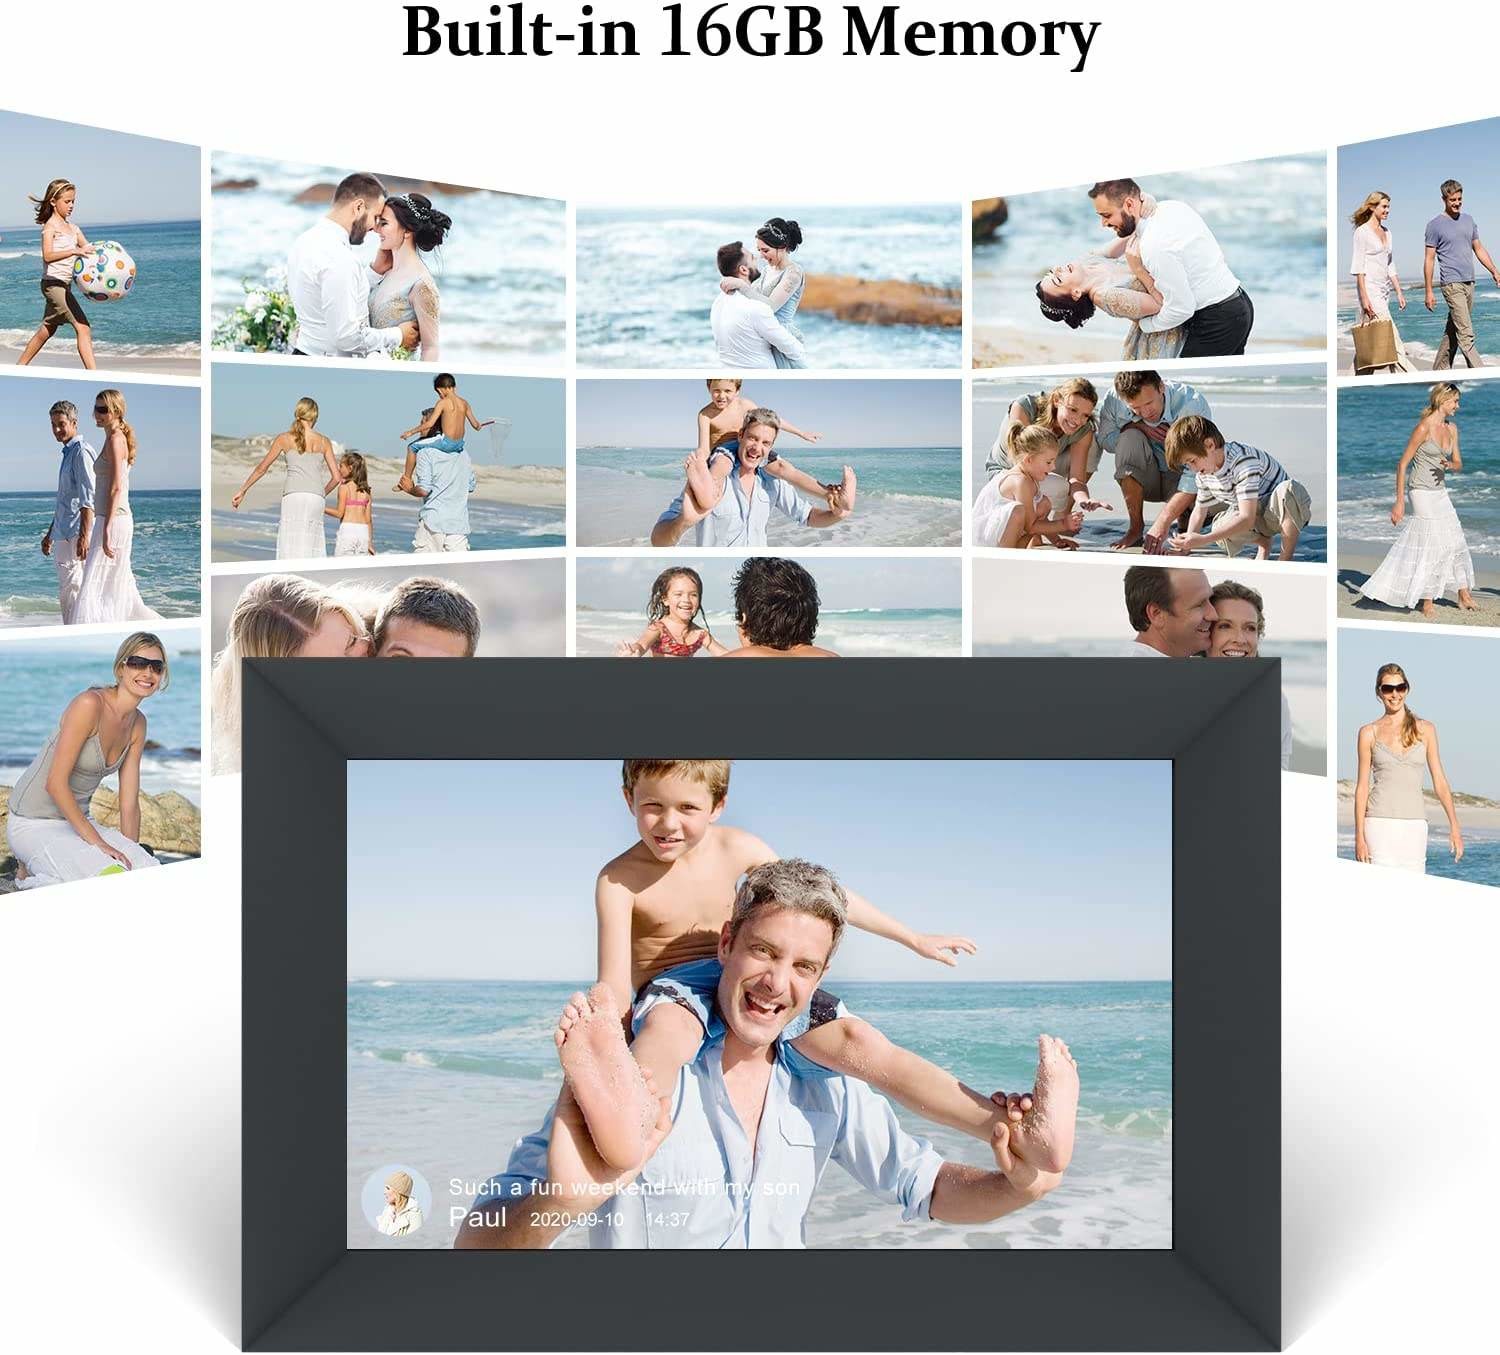 Customized Smart Cloud Picture Frame Auto-Rotate IPS Touch Screen WiFi Digital Photo Frame